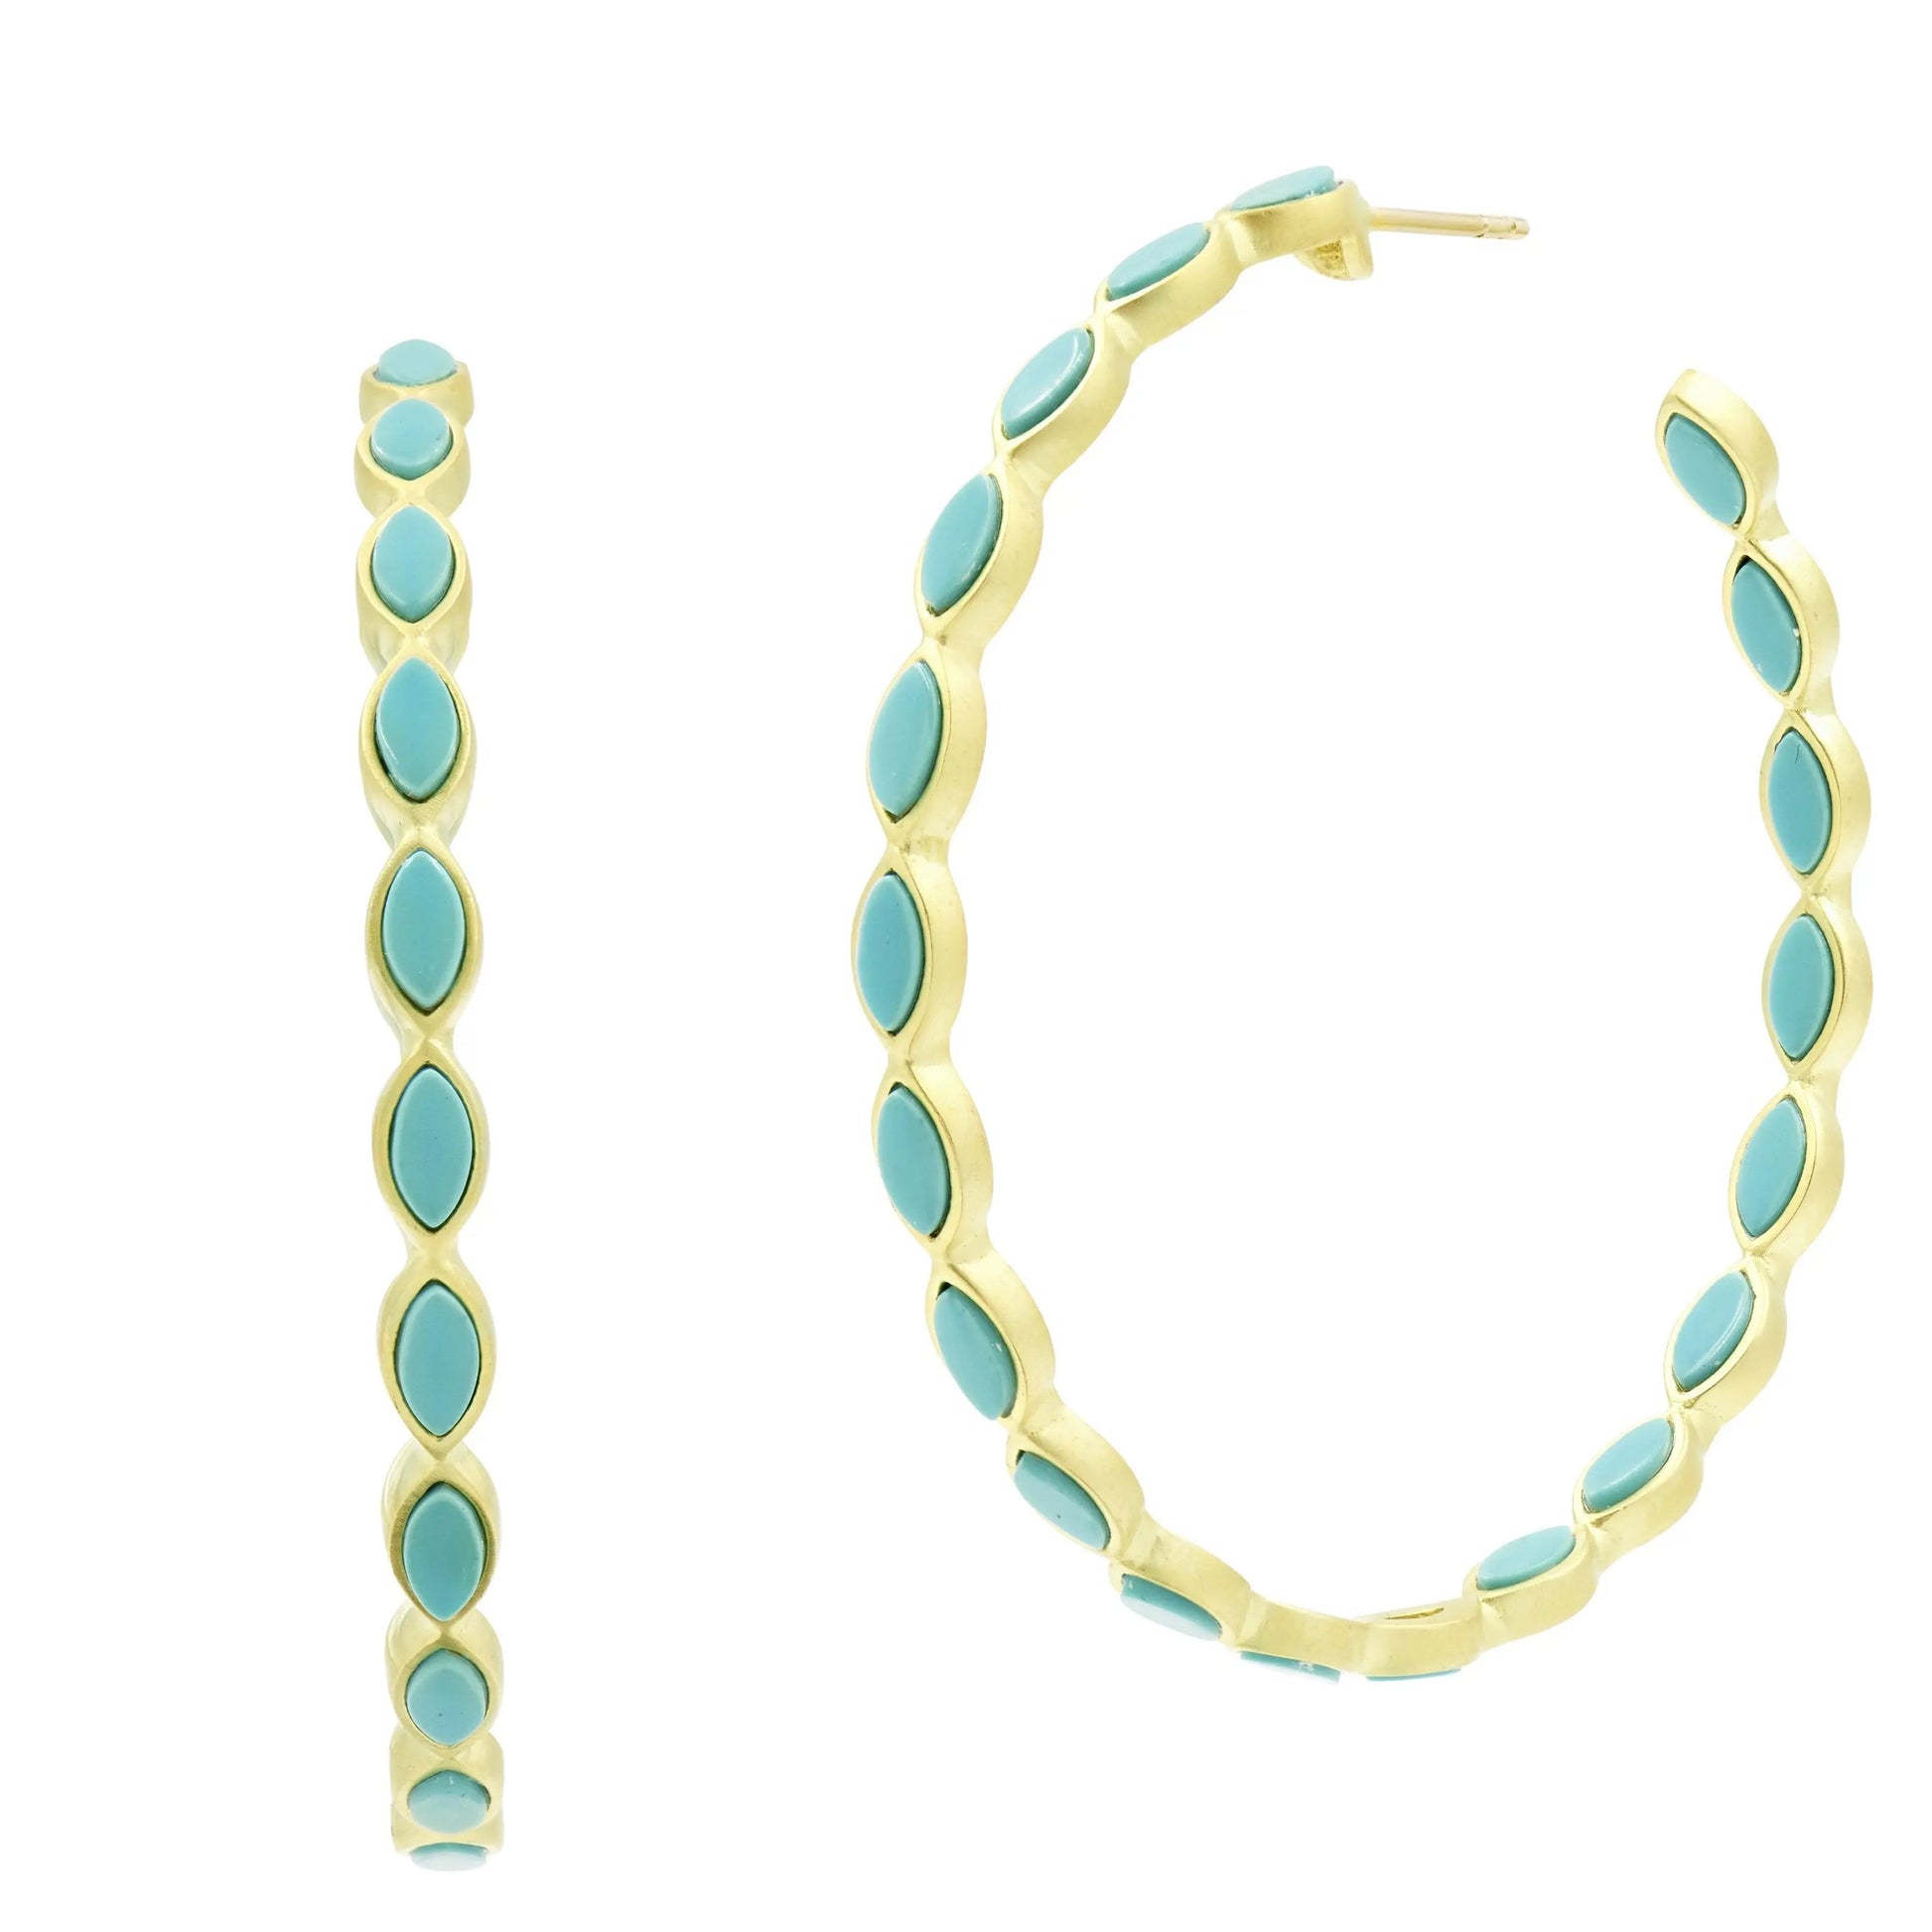 TurquoiseLarge Life of the Party FREIDA ROTHMAN EARRING